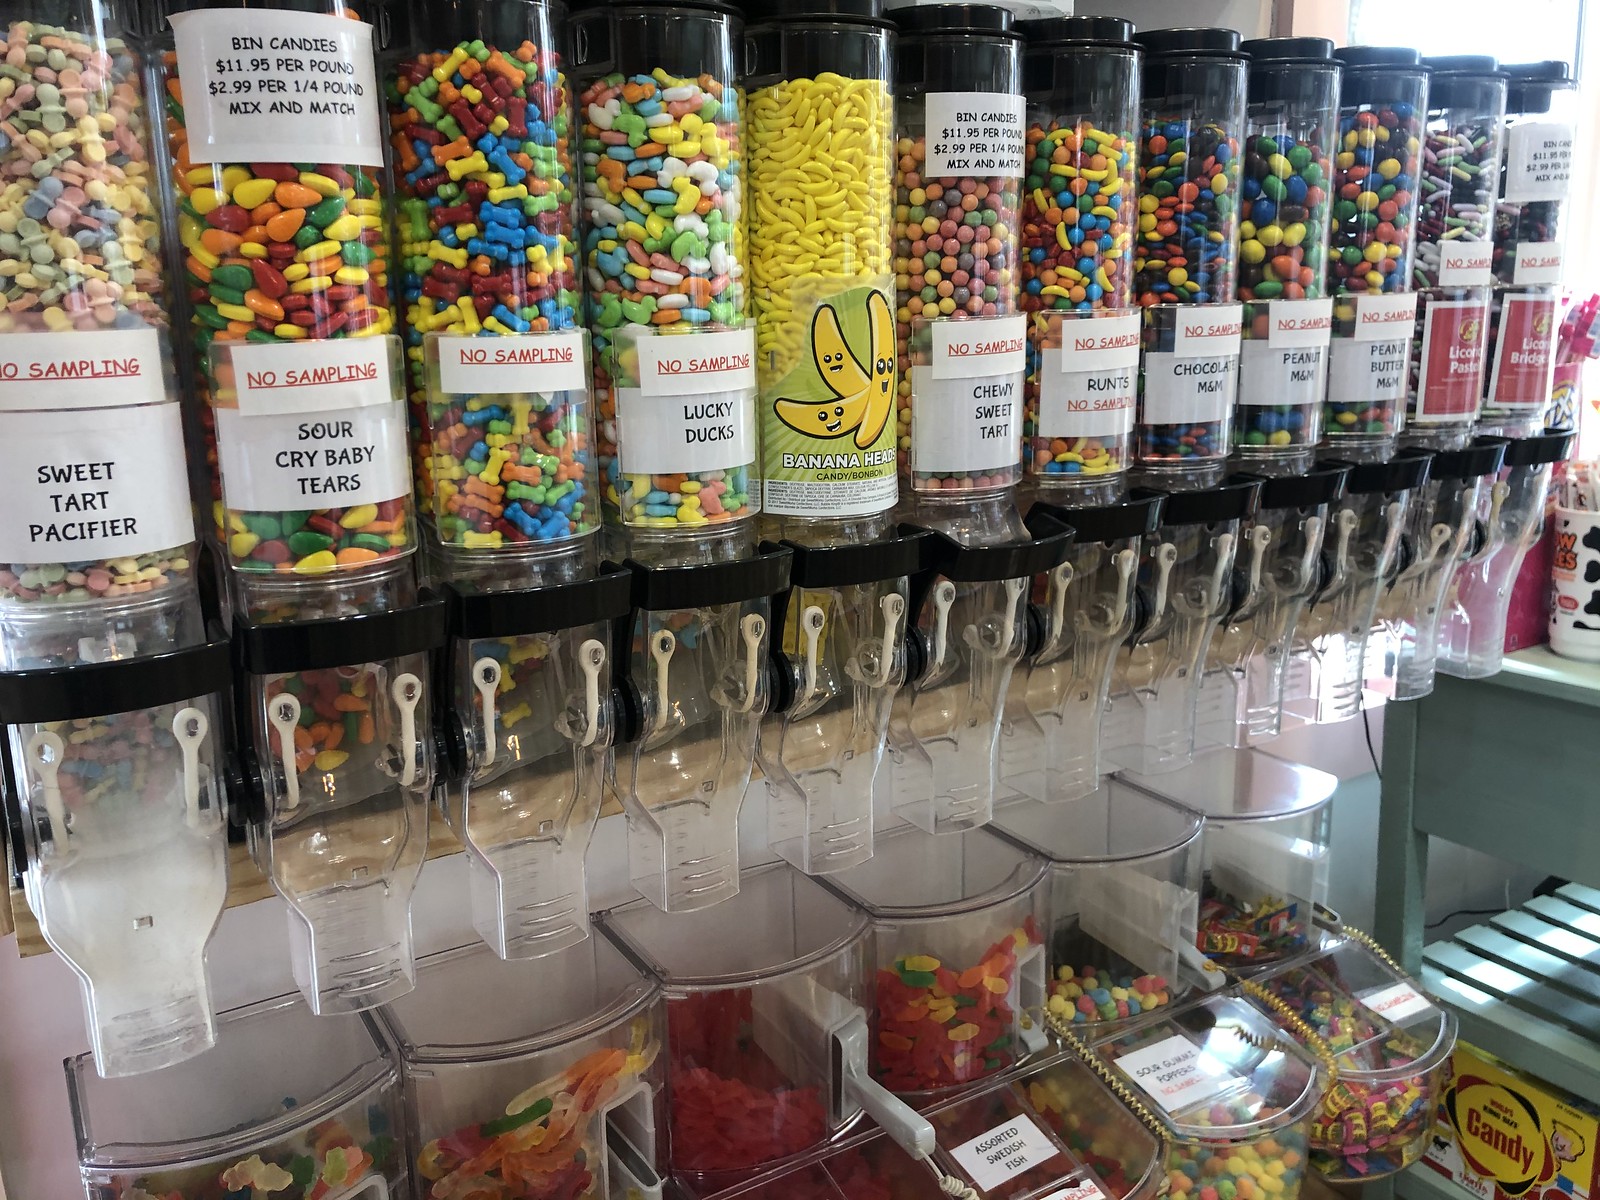 Barefoot landing - wee r sweets, spices, fudge, olives. Pepper palace